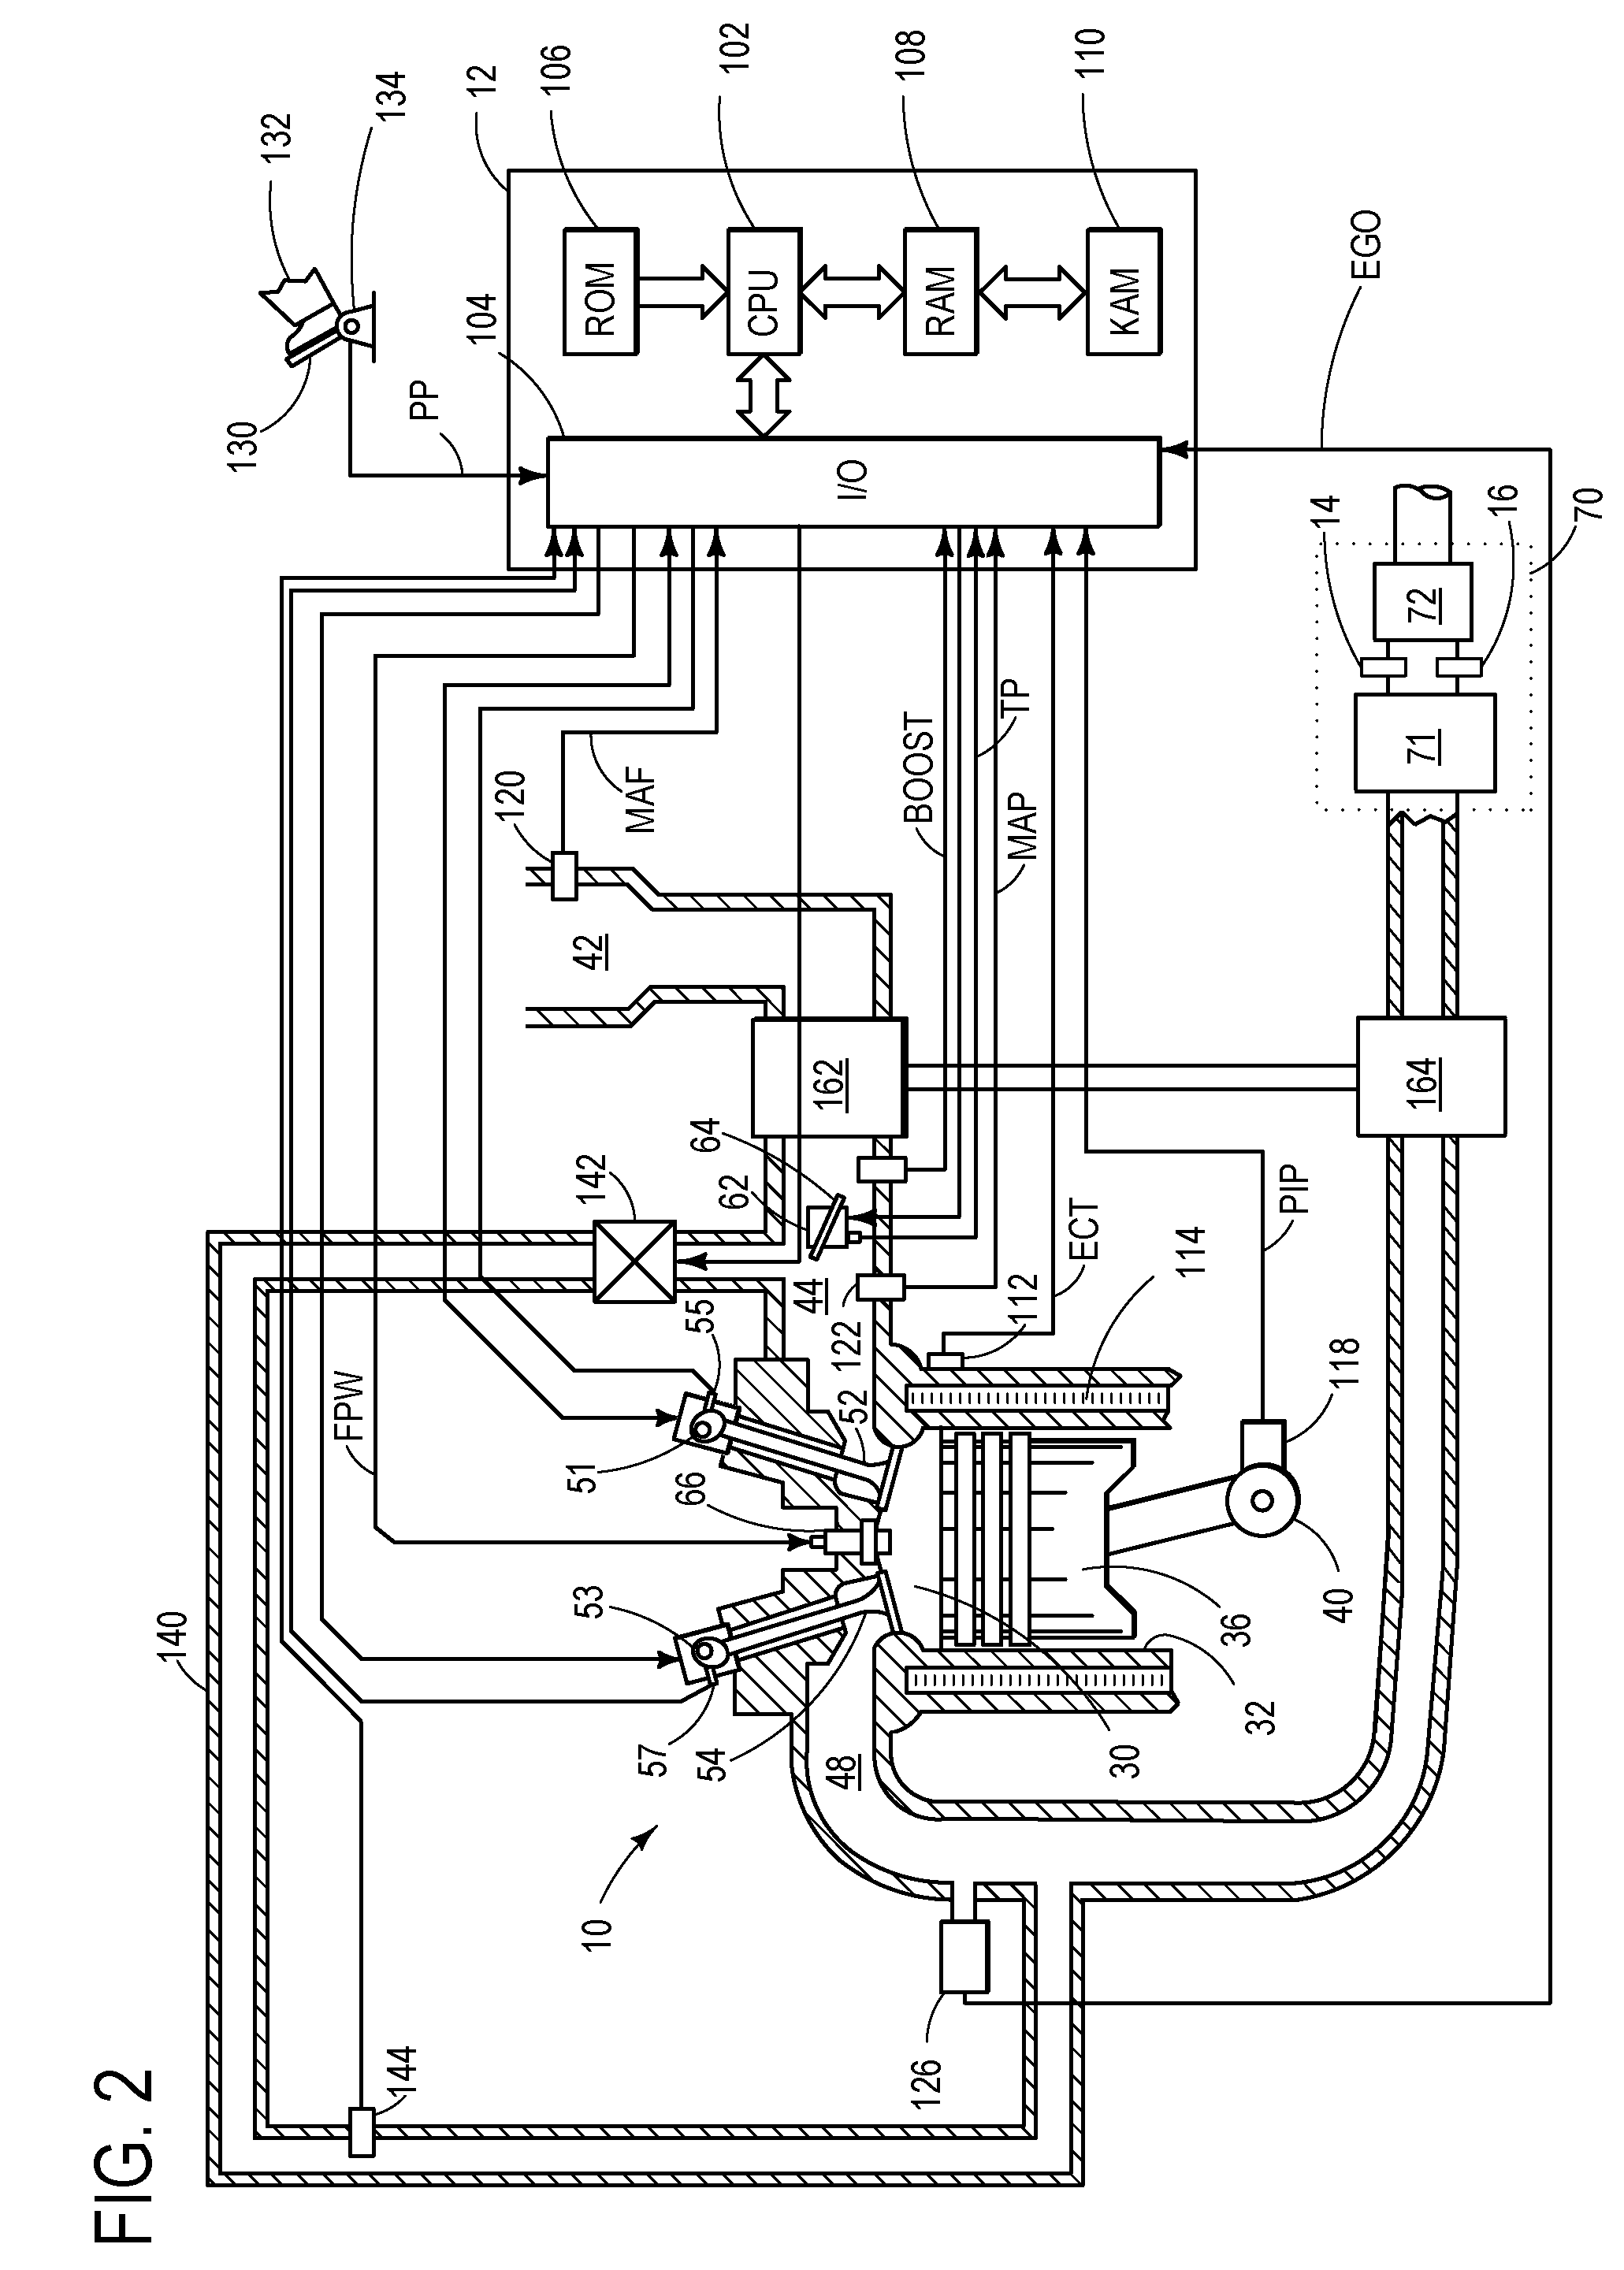 Particulate filter regeneration in an engine